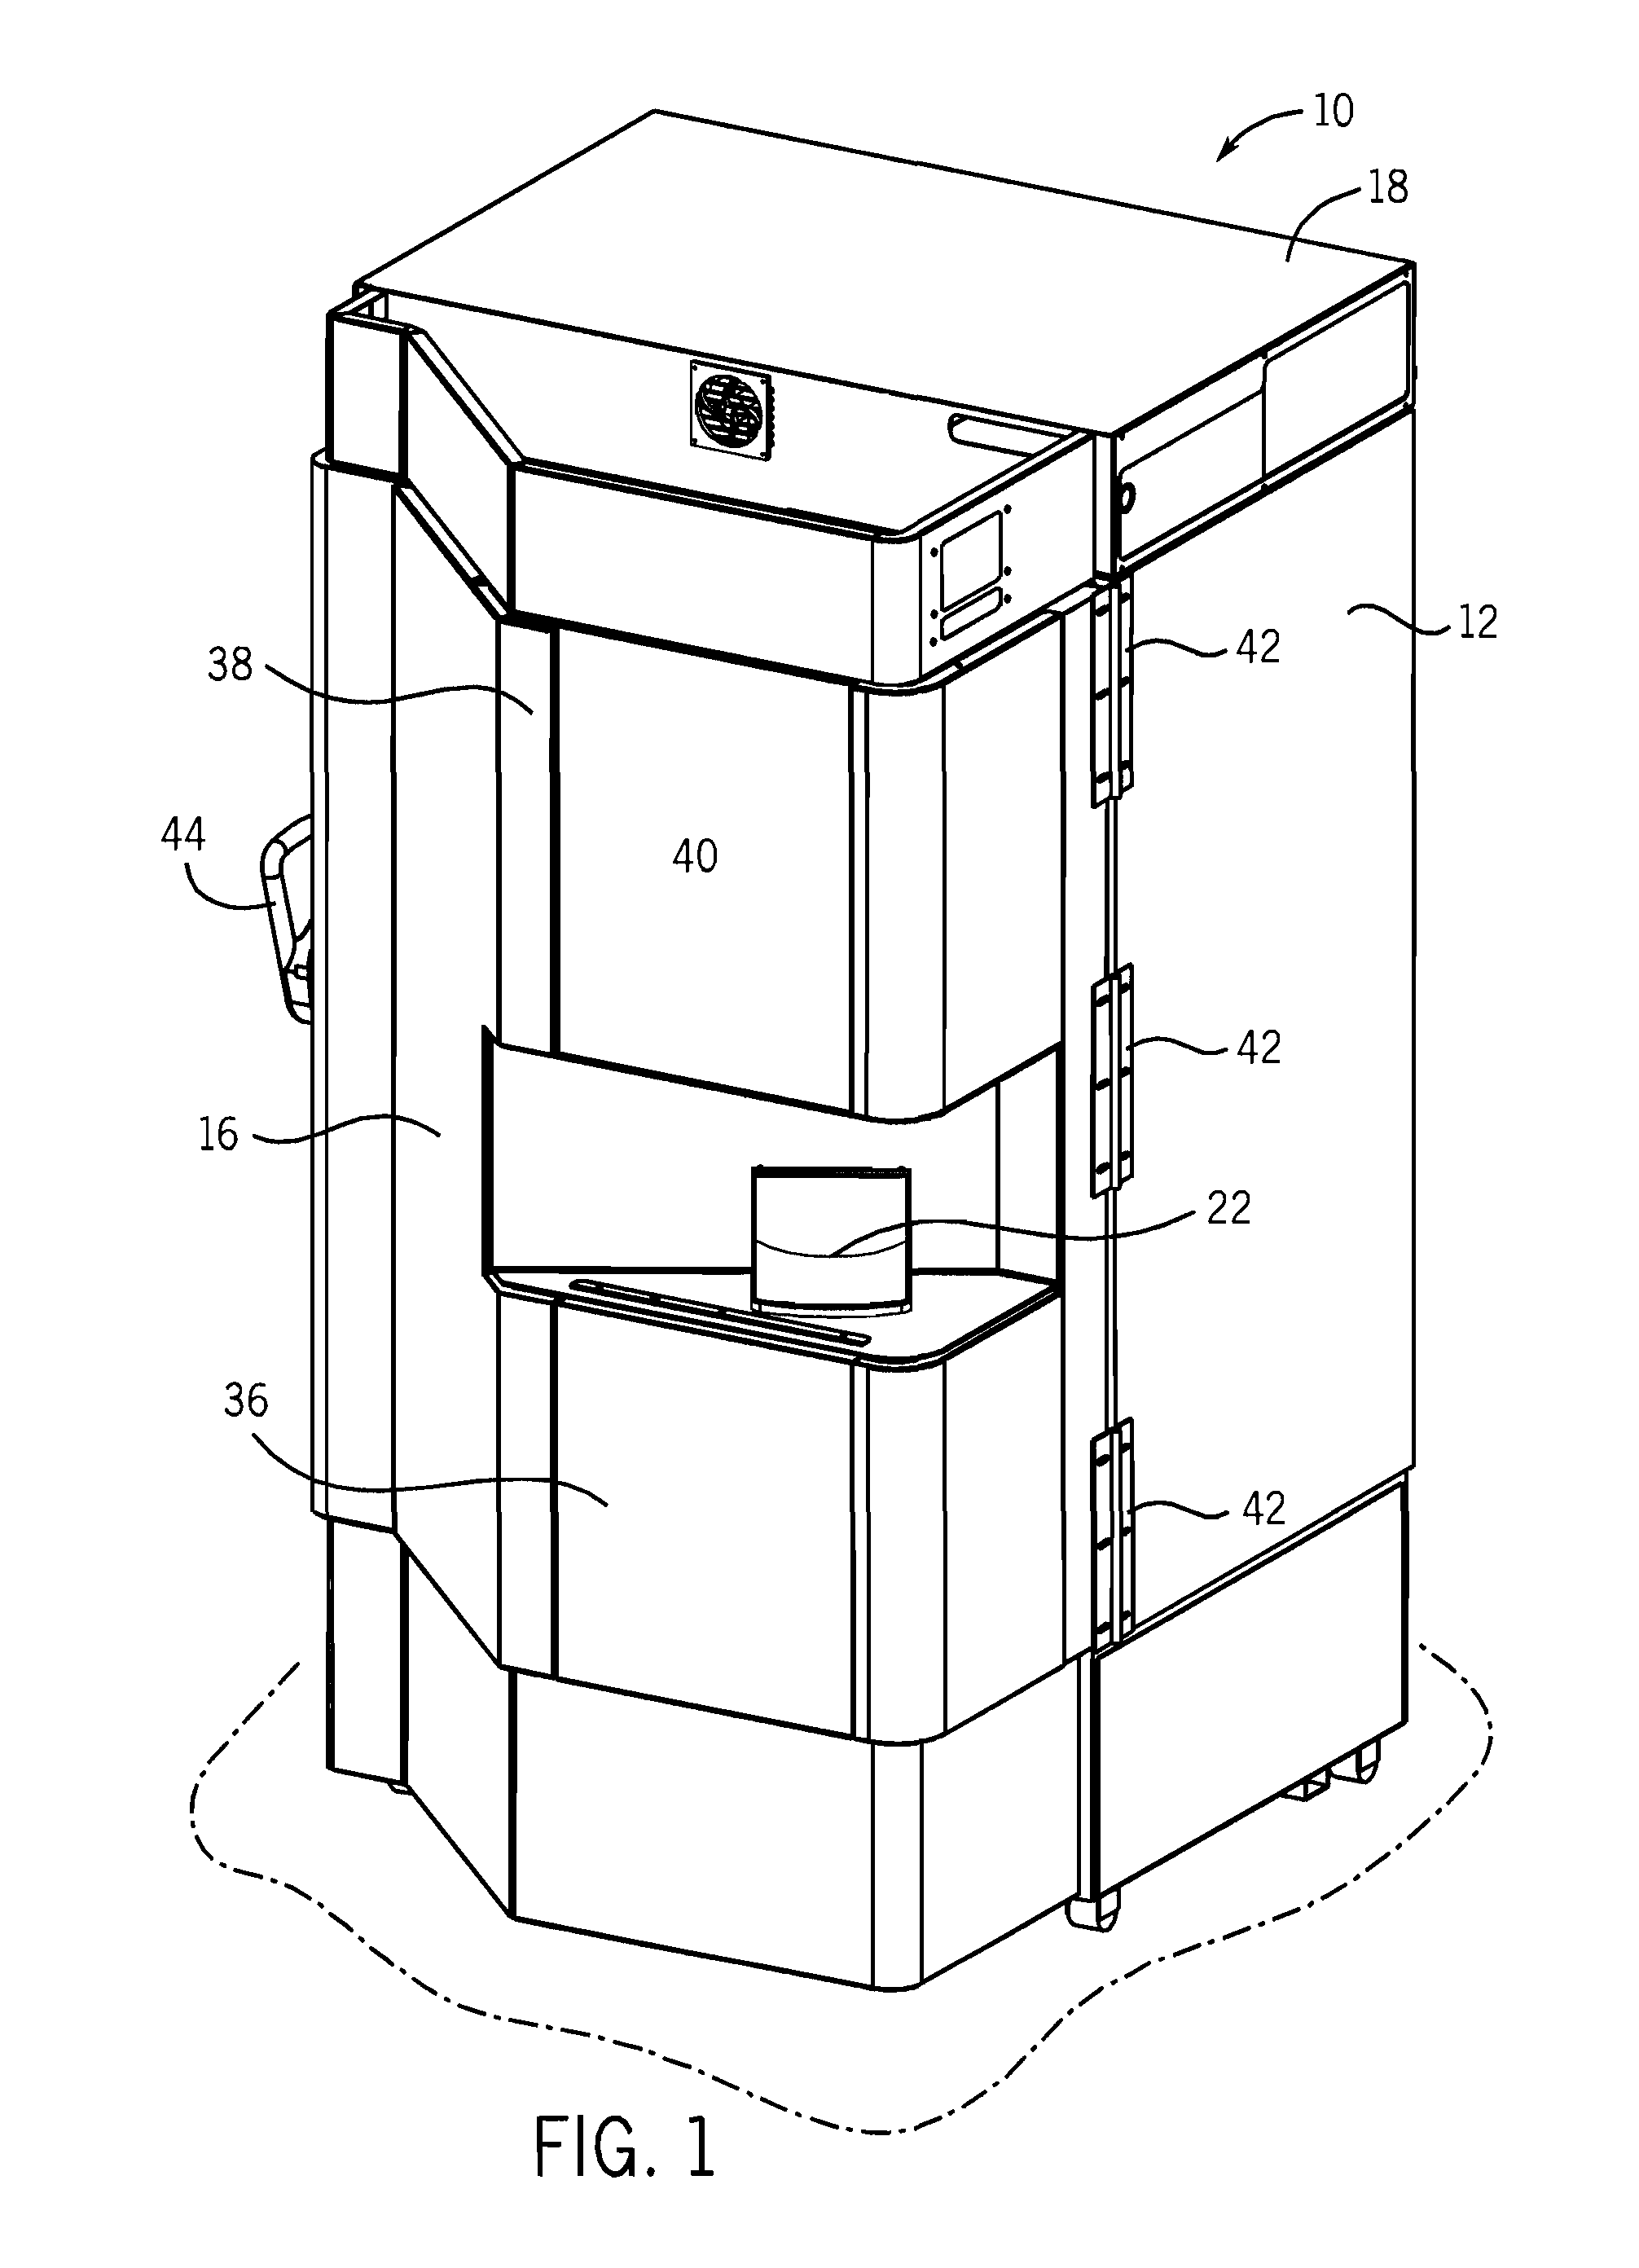 Automated storage and retrieval system for storing biological or chemical samples at ultra-low temperatures